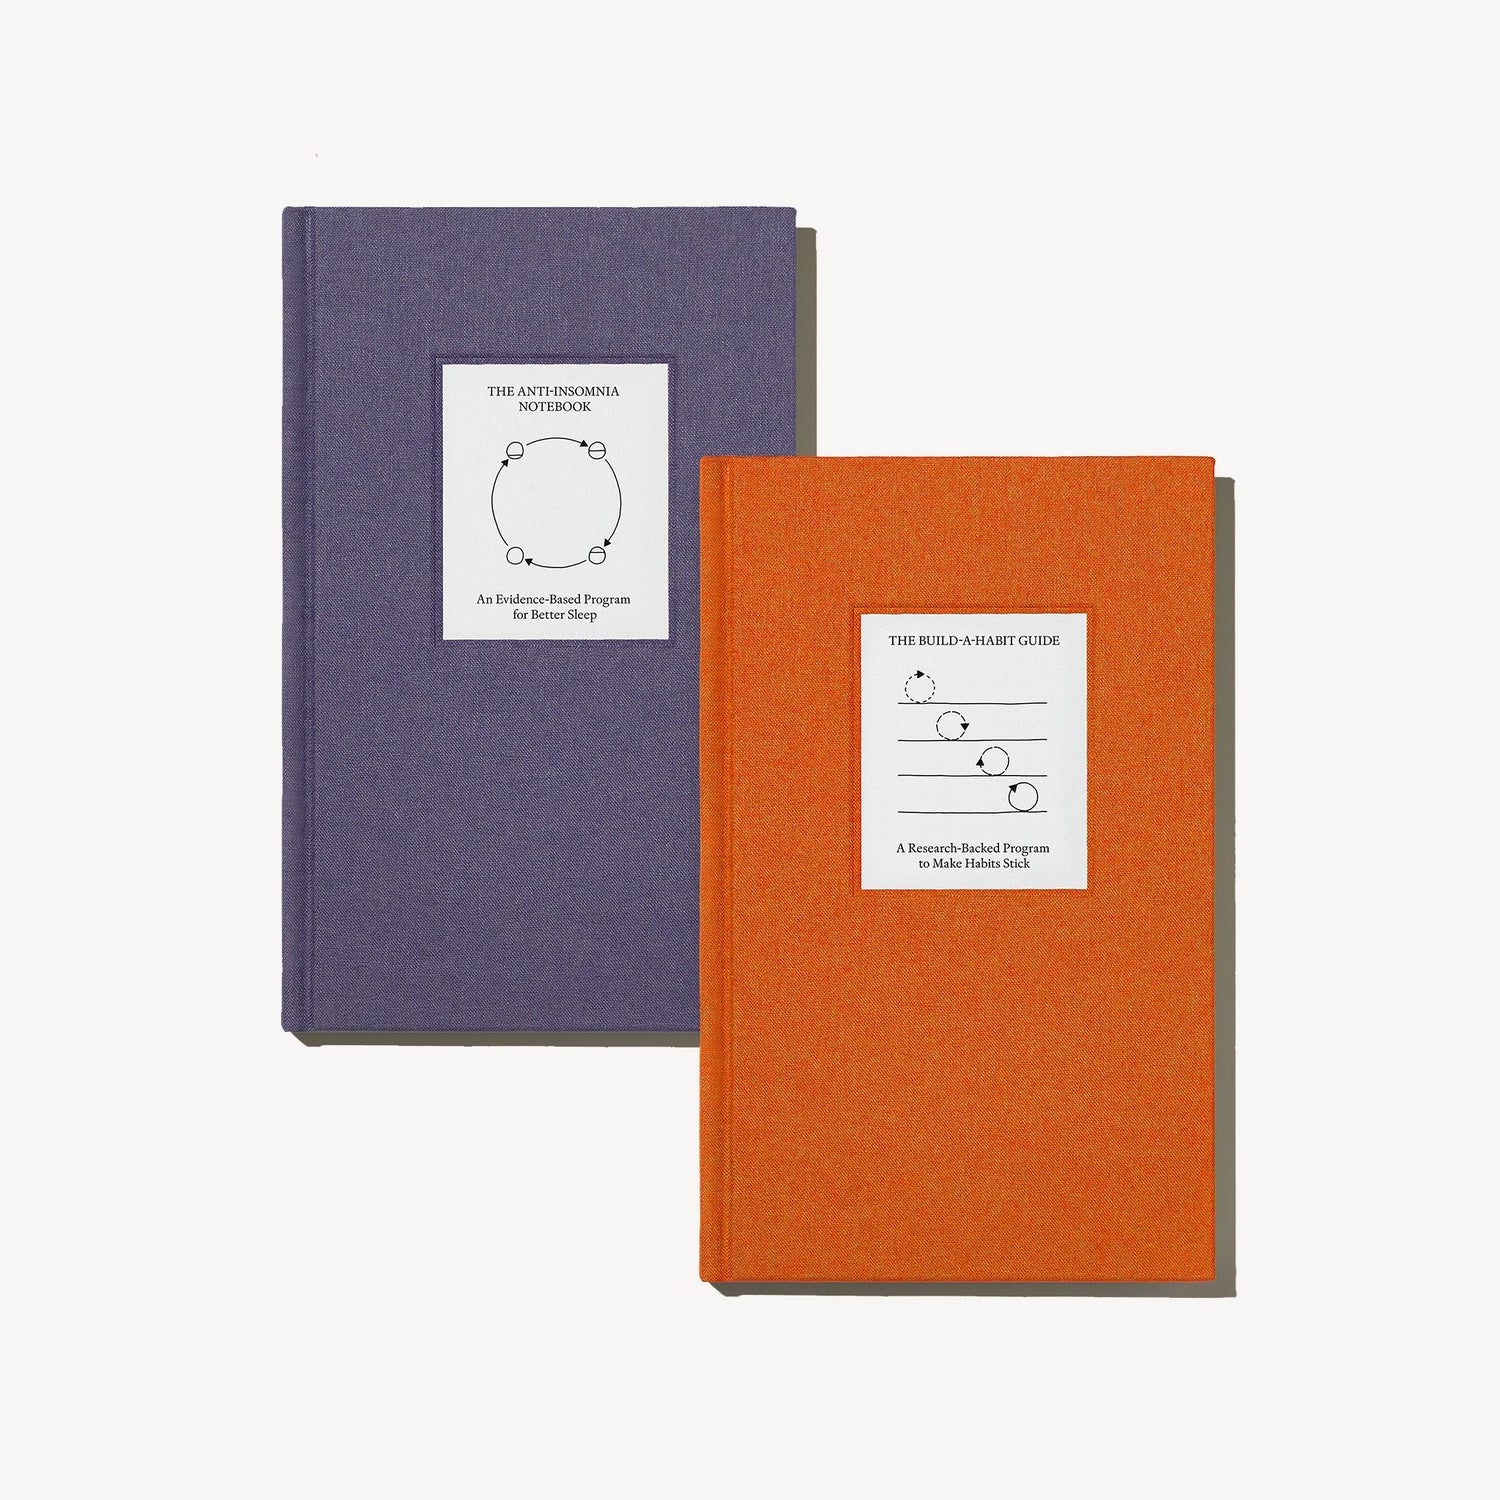 Therapy Notebooks